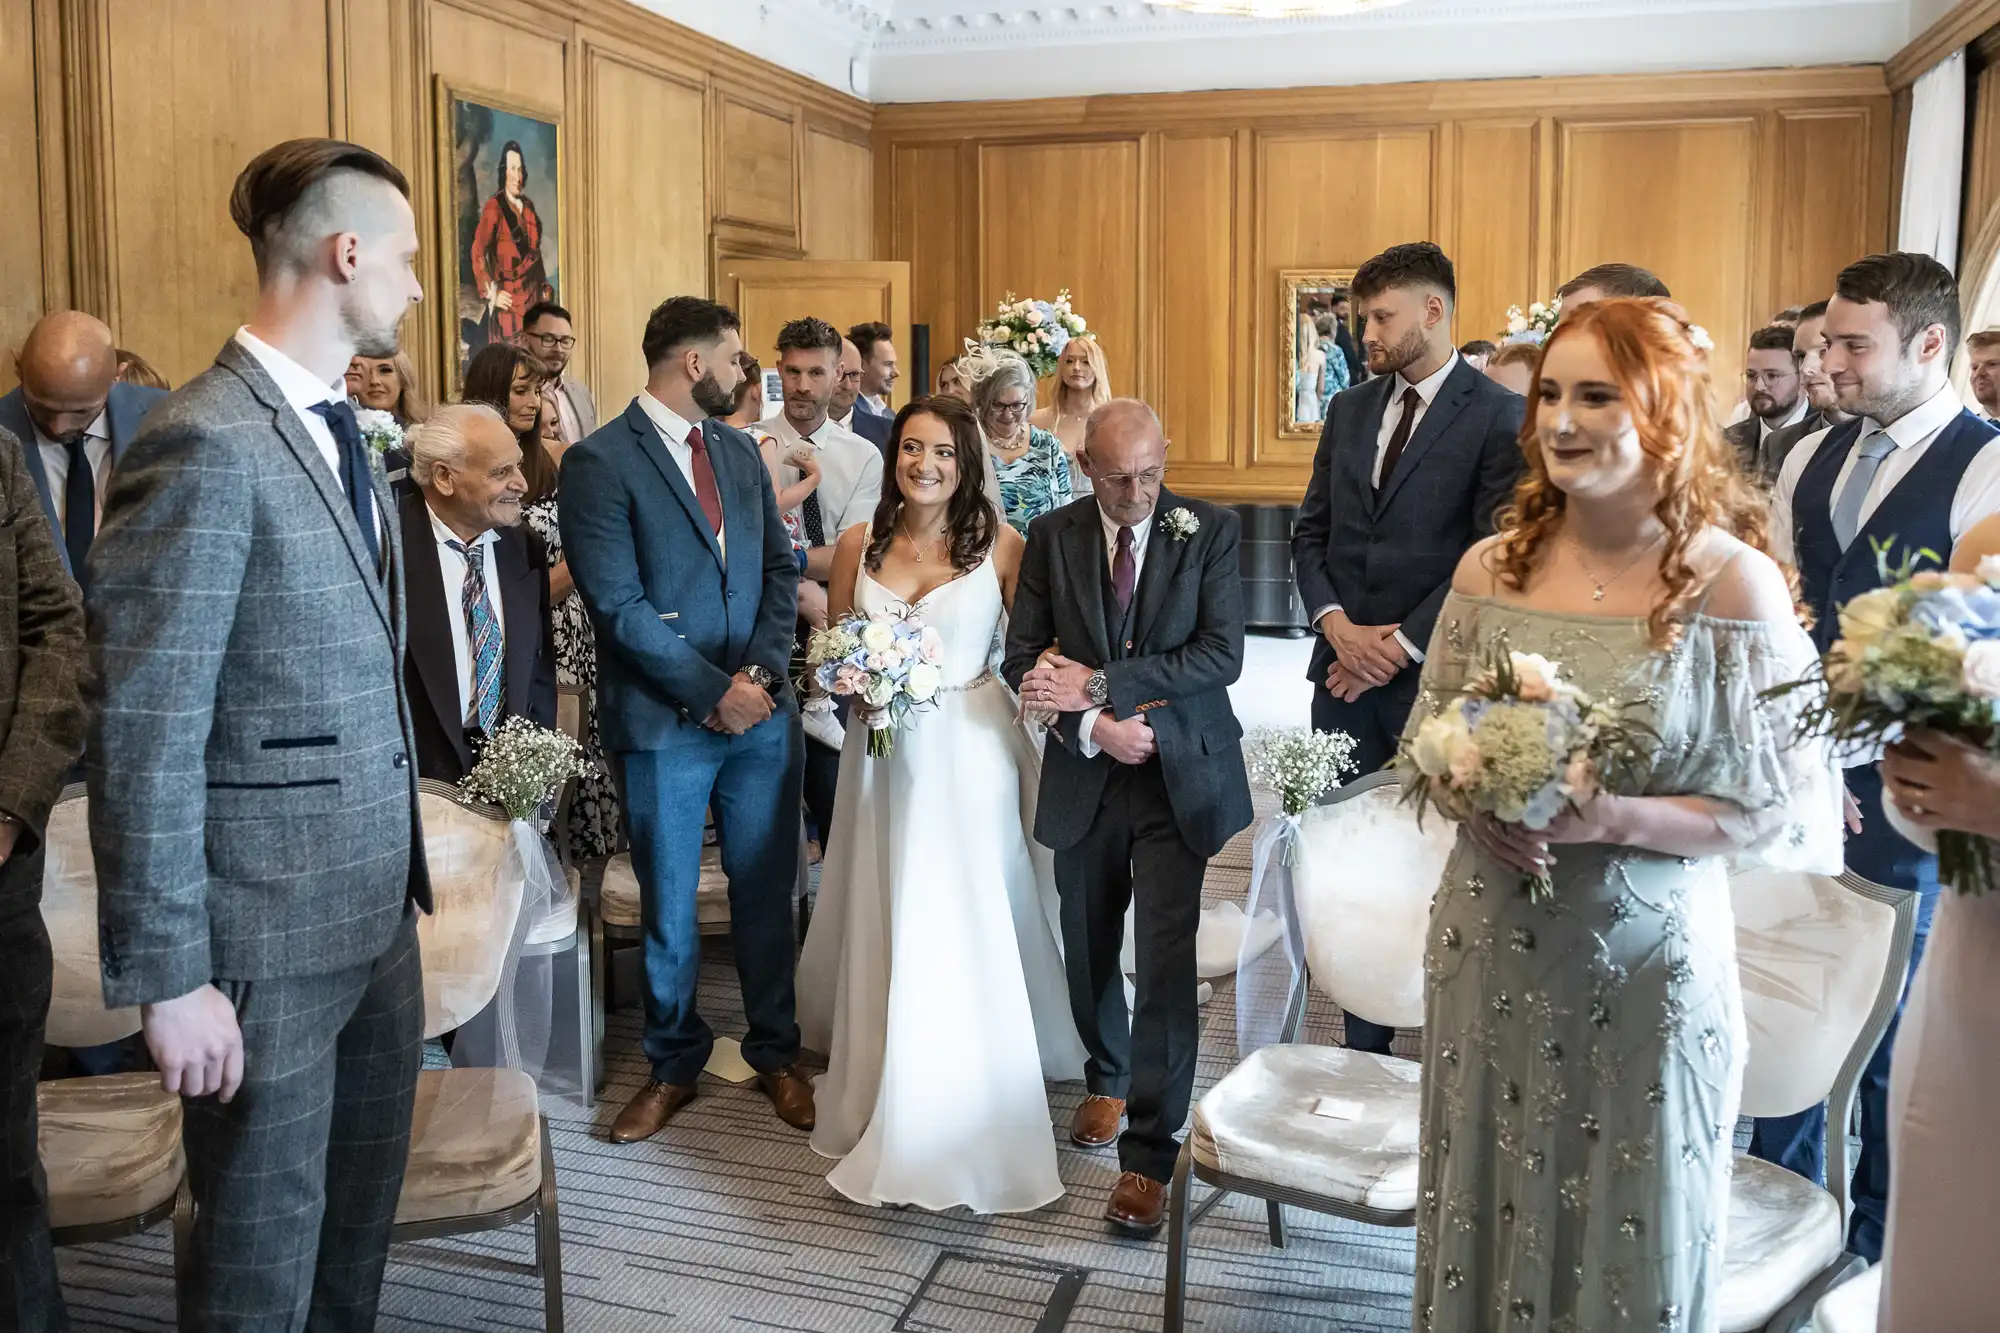 A wedding ceremony in a decorated room with guests watching as the bride walks down the aisle accompanied by an older man.